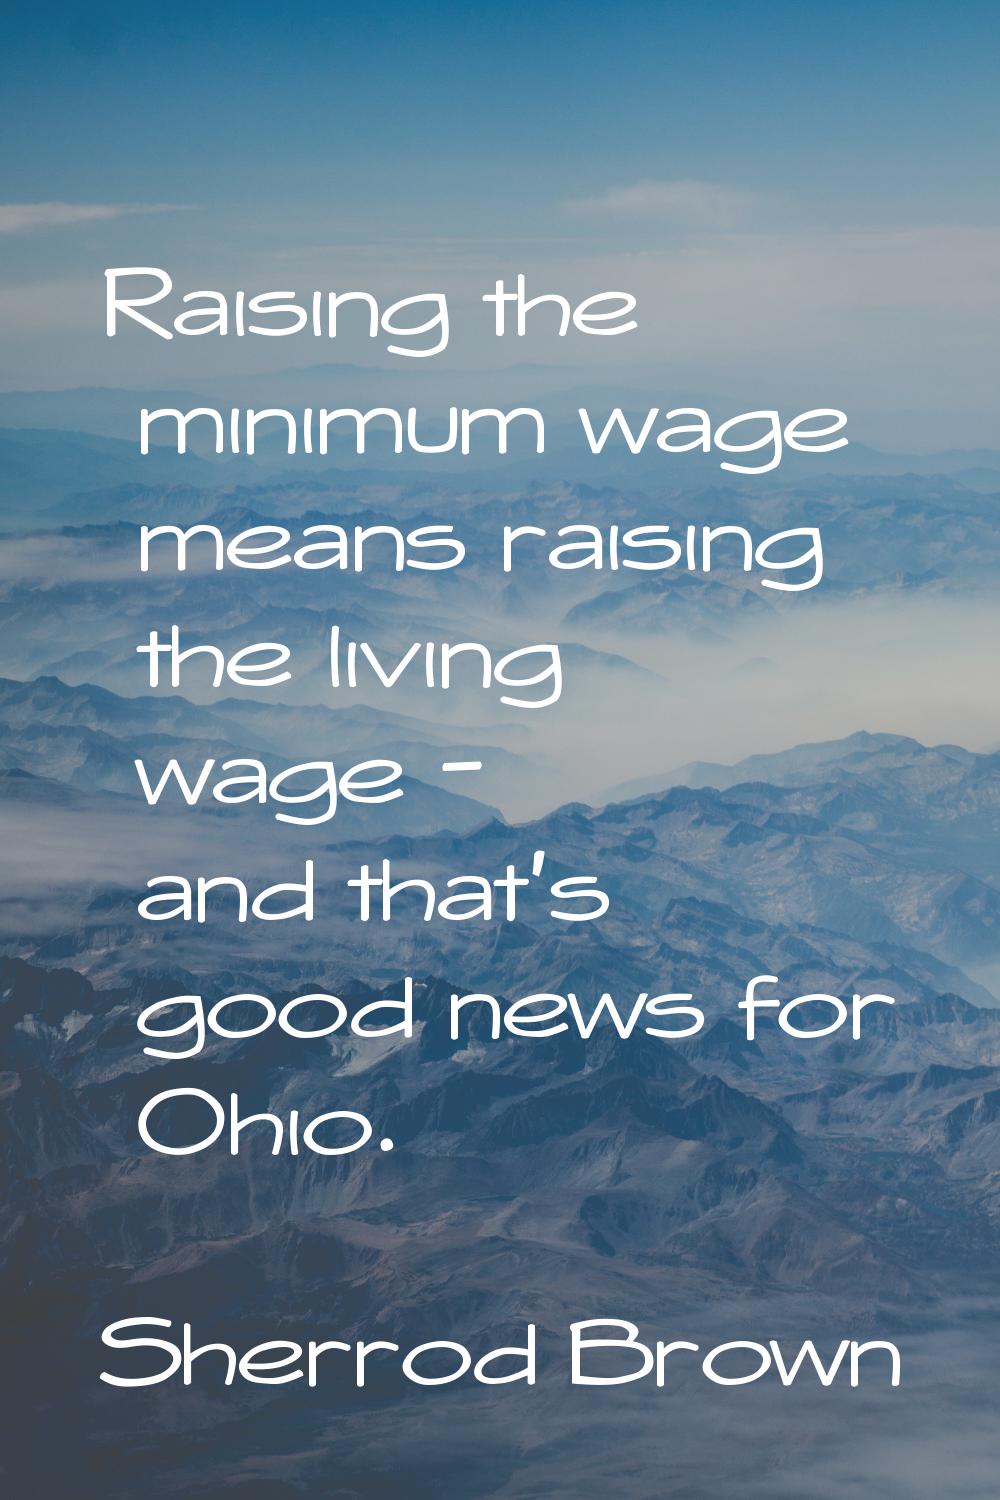 Raising the minimum wage means raising the living wage - and that's good news for Ohio.